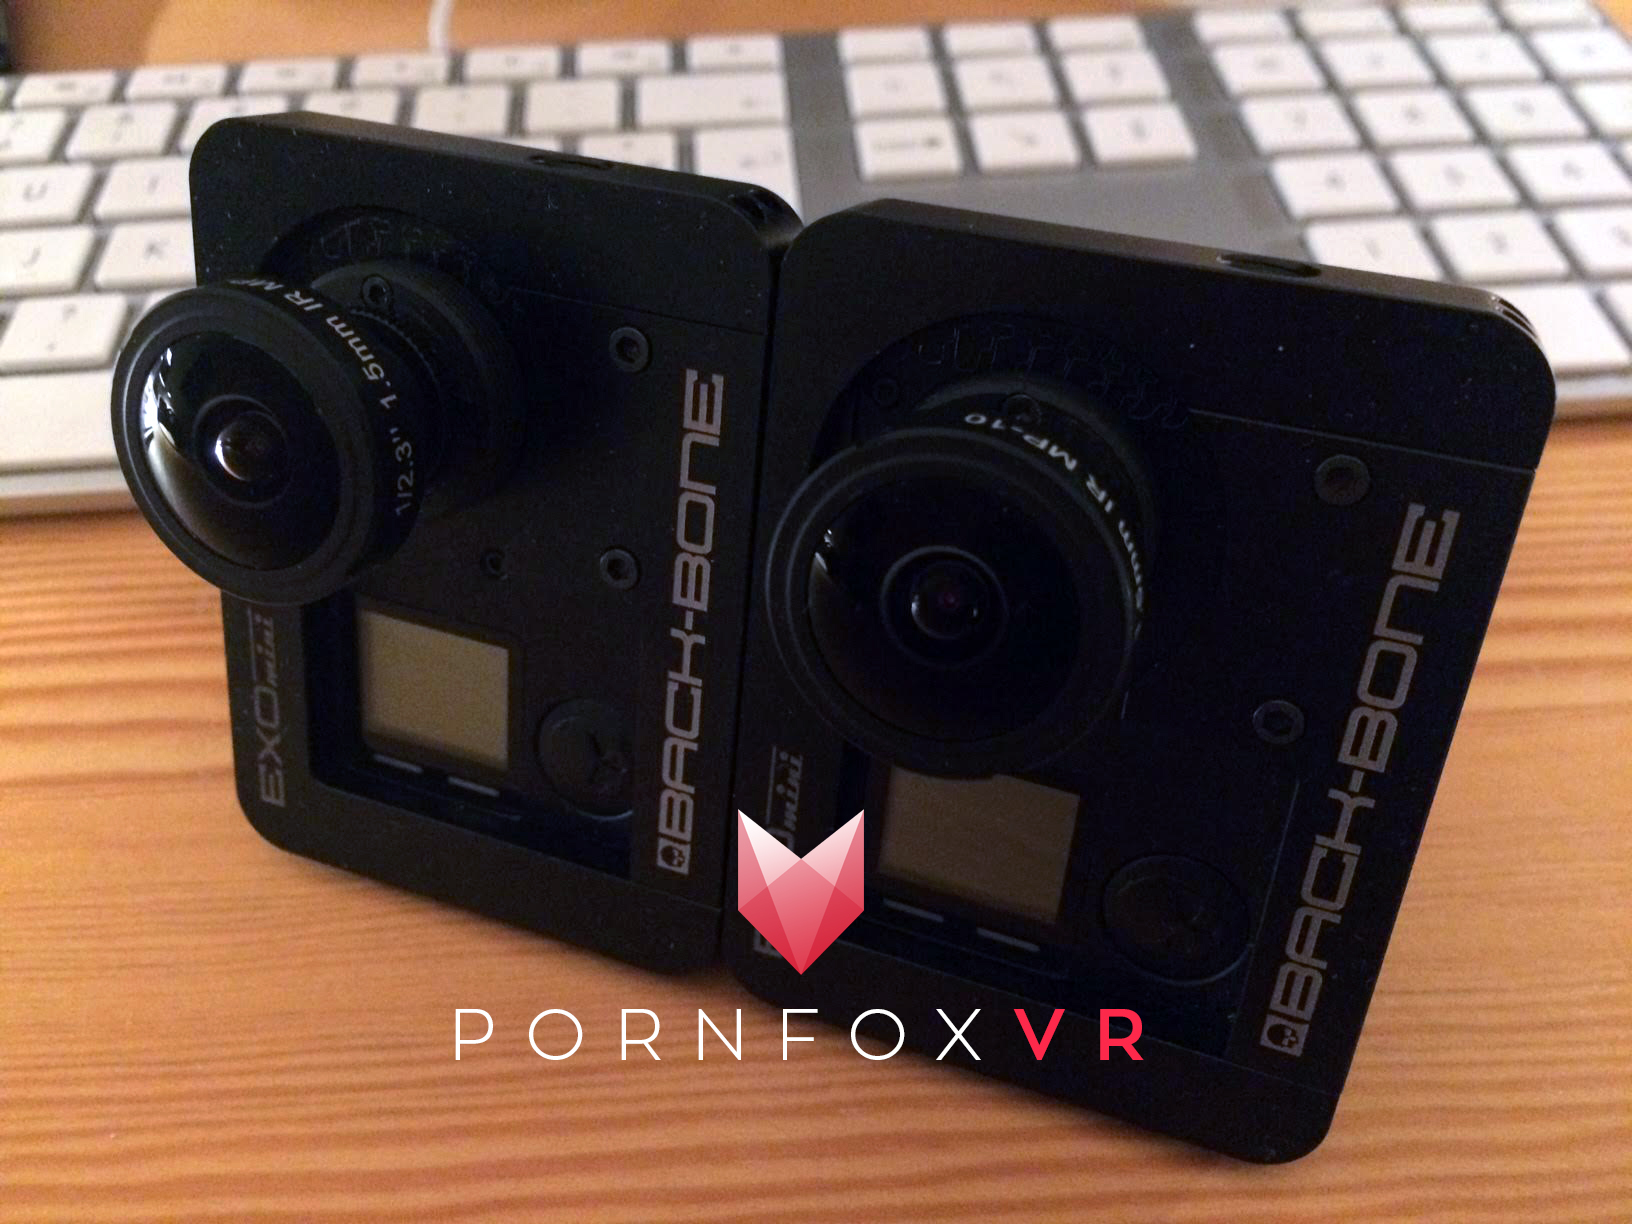 A talk about virtual reality adult entertainment with PornFoxVR founder